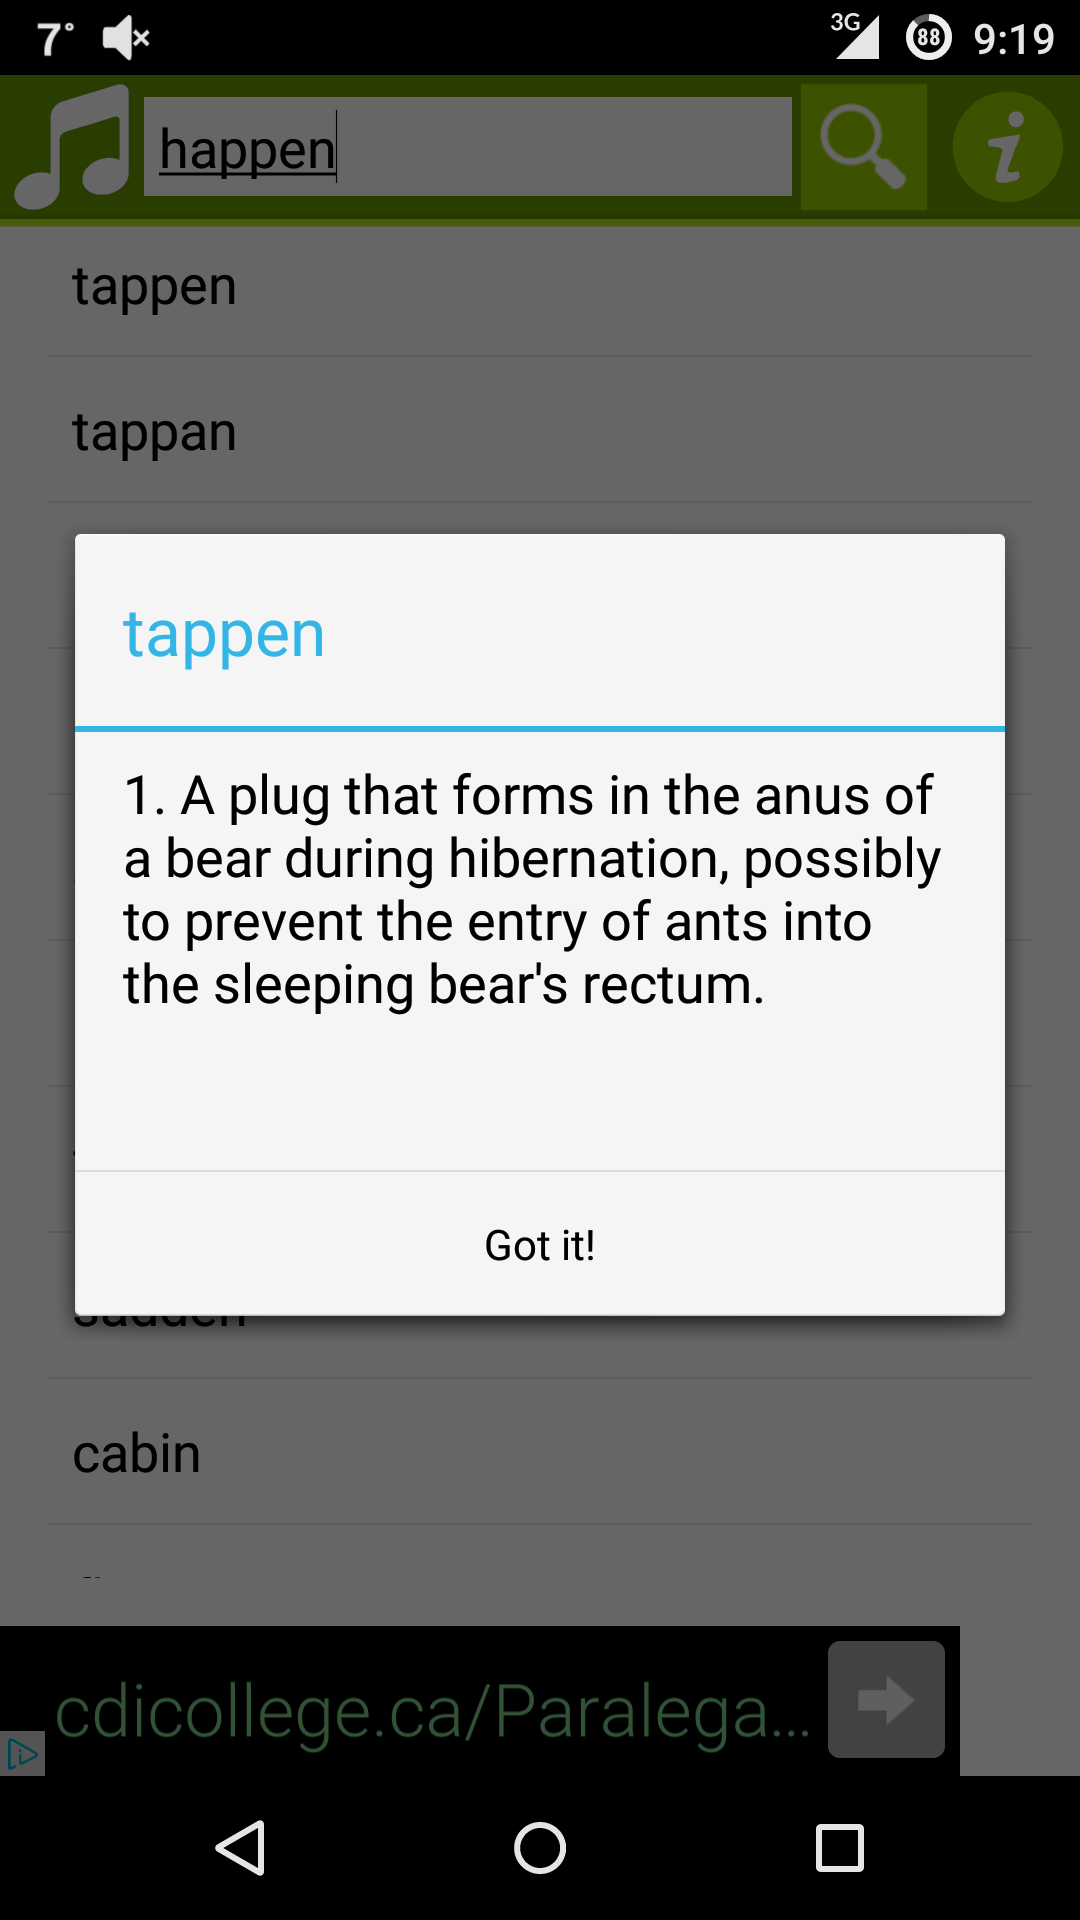 7 36 happena i tappen tappan tappen 1. A plug that forms in the anus of a bear during hibernation, possibly to prevent the entry of ants into the sleeping bear's rectum. Got it! cabin cdicollege.caParalega...